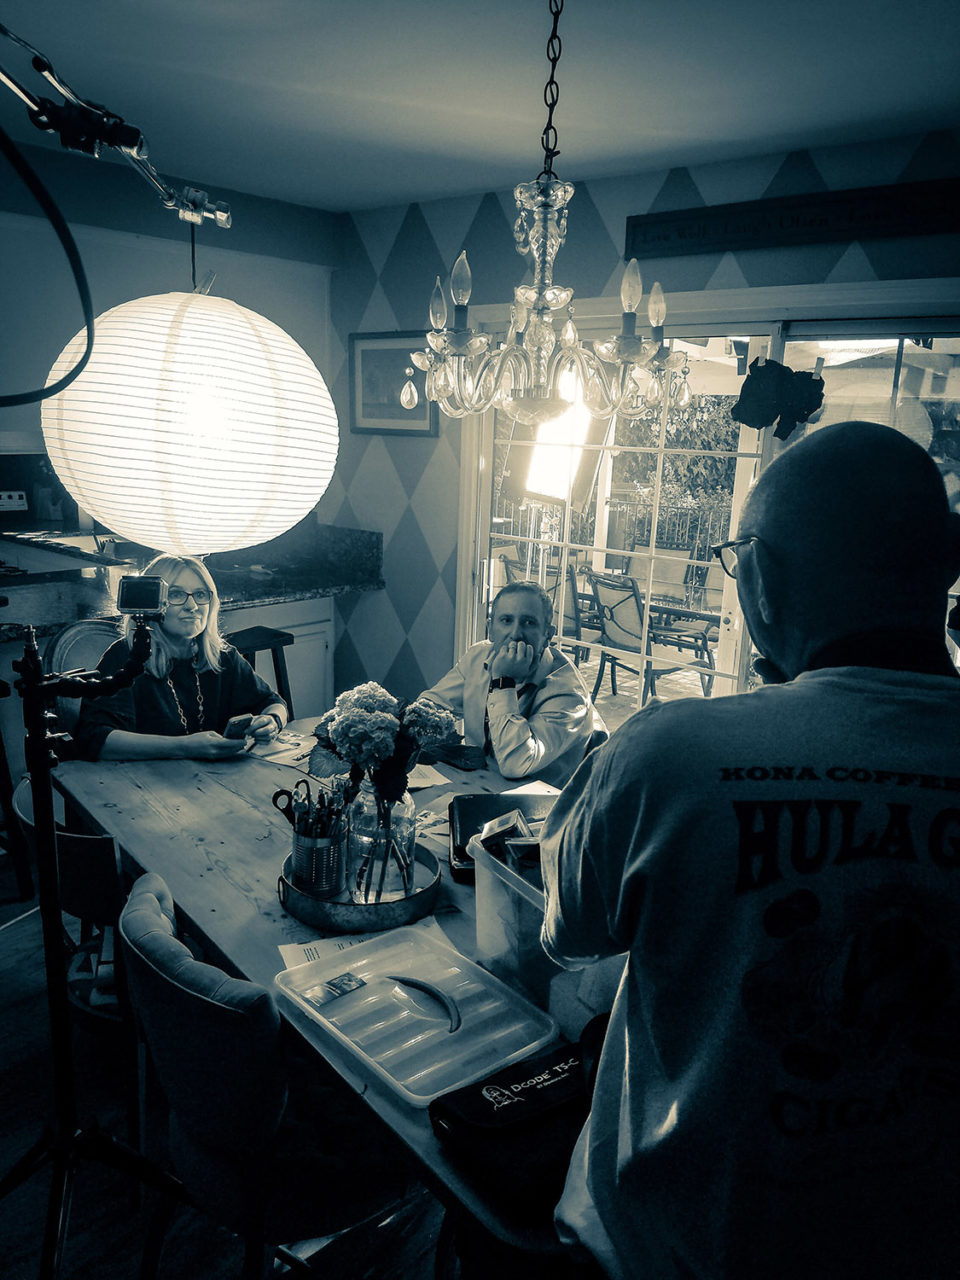 behind the scenes at corporate video shoot at a house location for a Los Angeles video production company